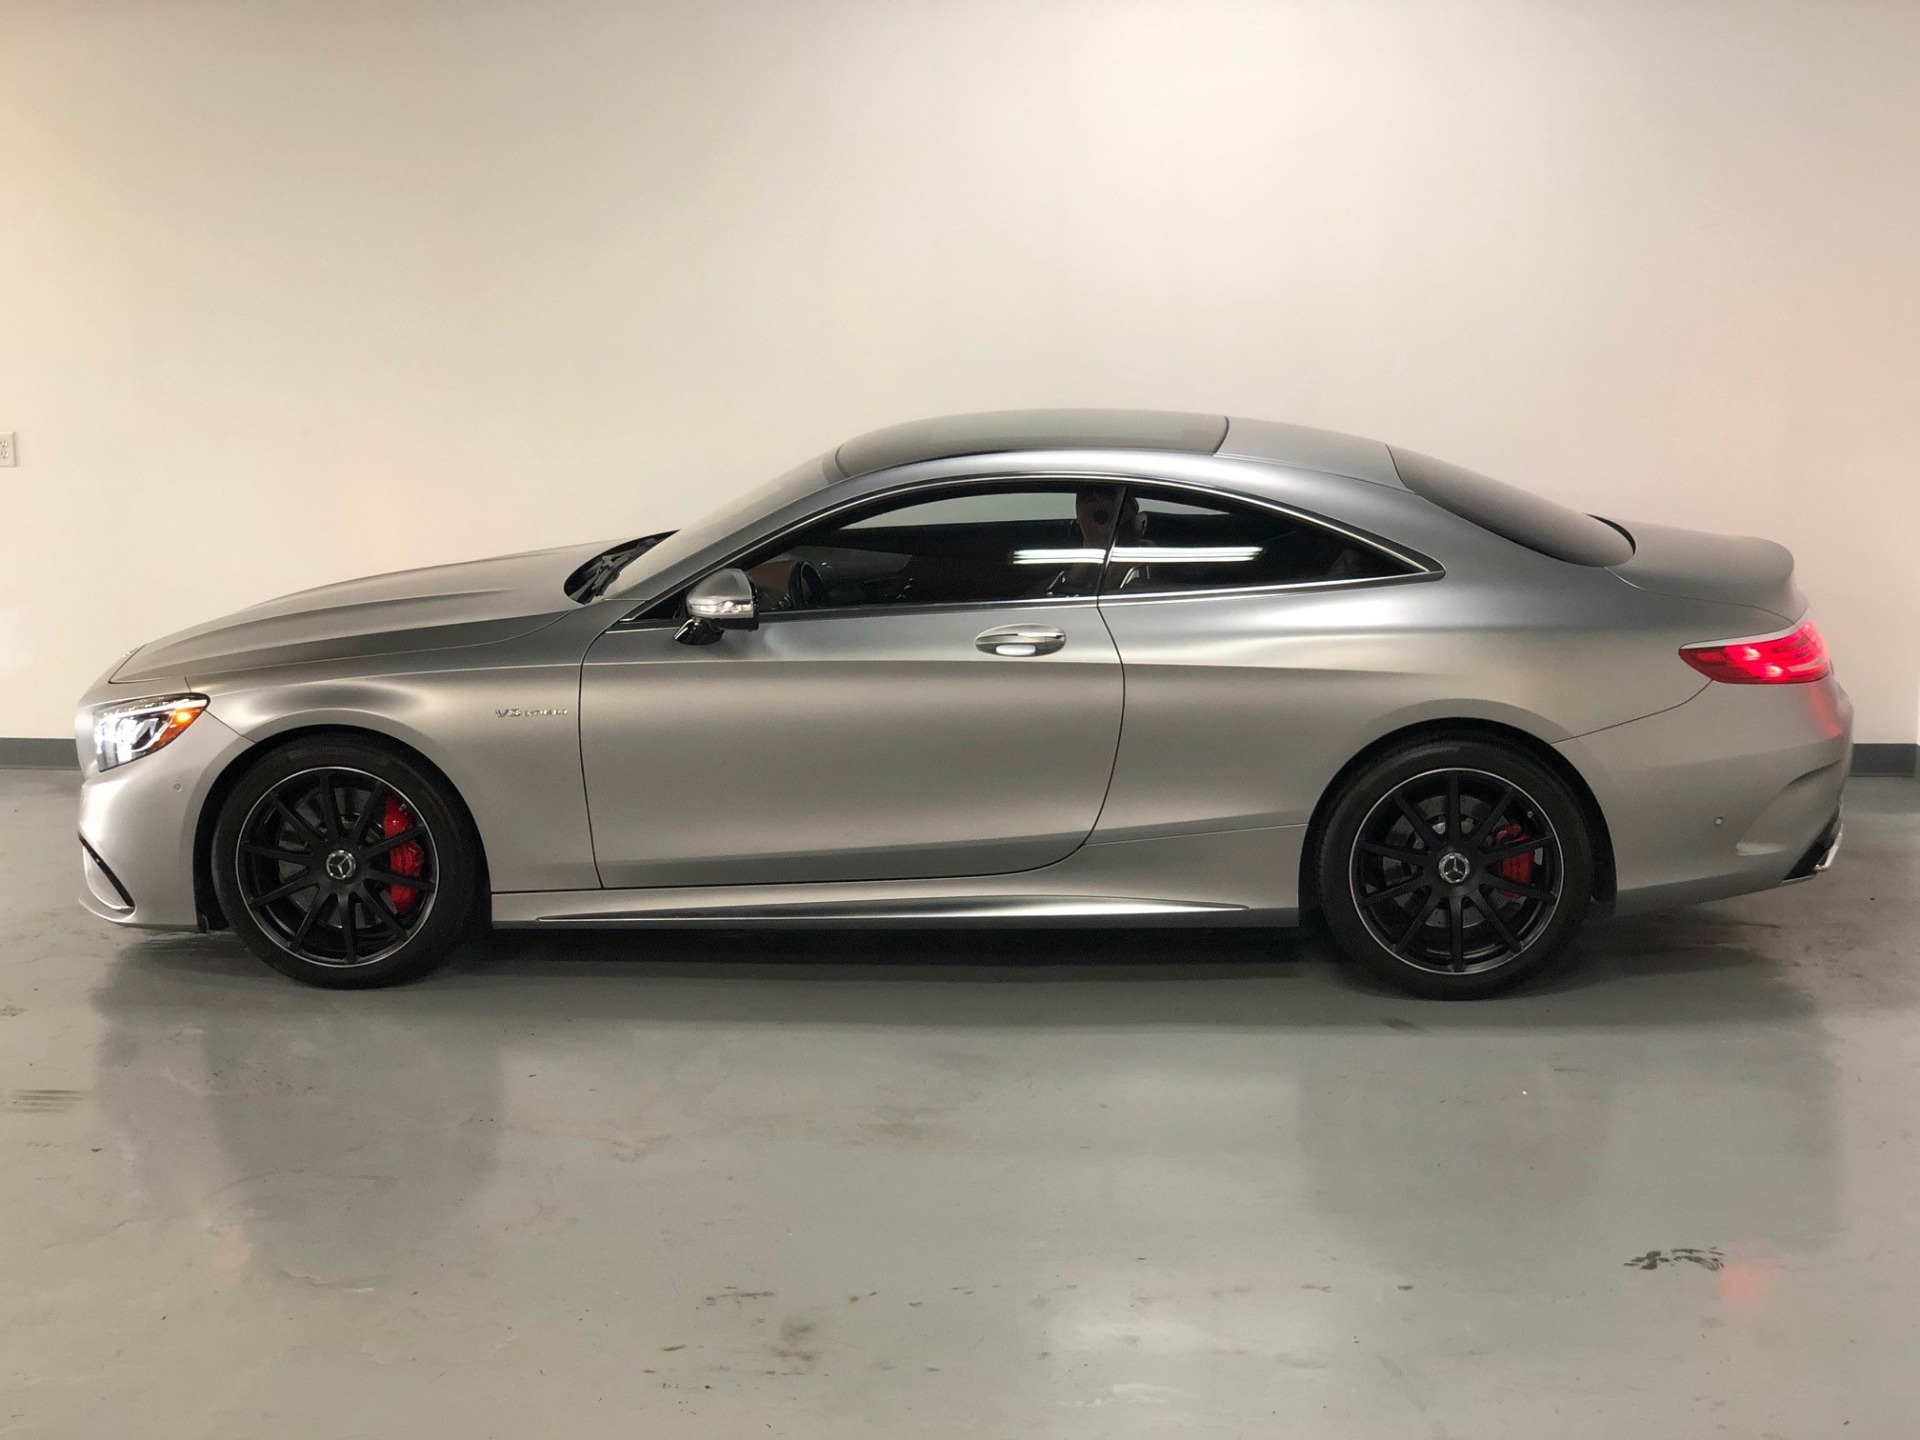 Used 15 Designo Magno Alanite Grey Mercedes Benz S Class S63 Amg Coupe Awd S 63 Amg For Sale Sold Prime Motorz Stock 2851